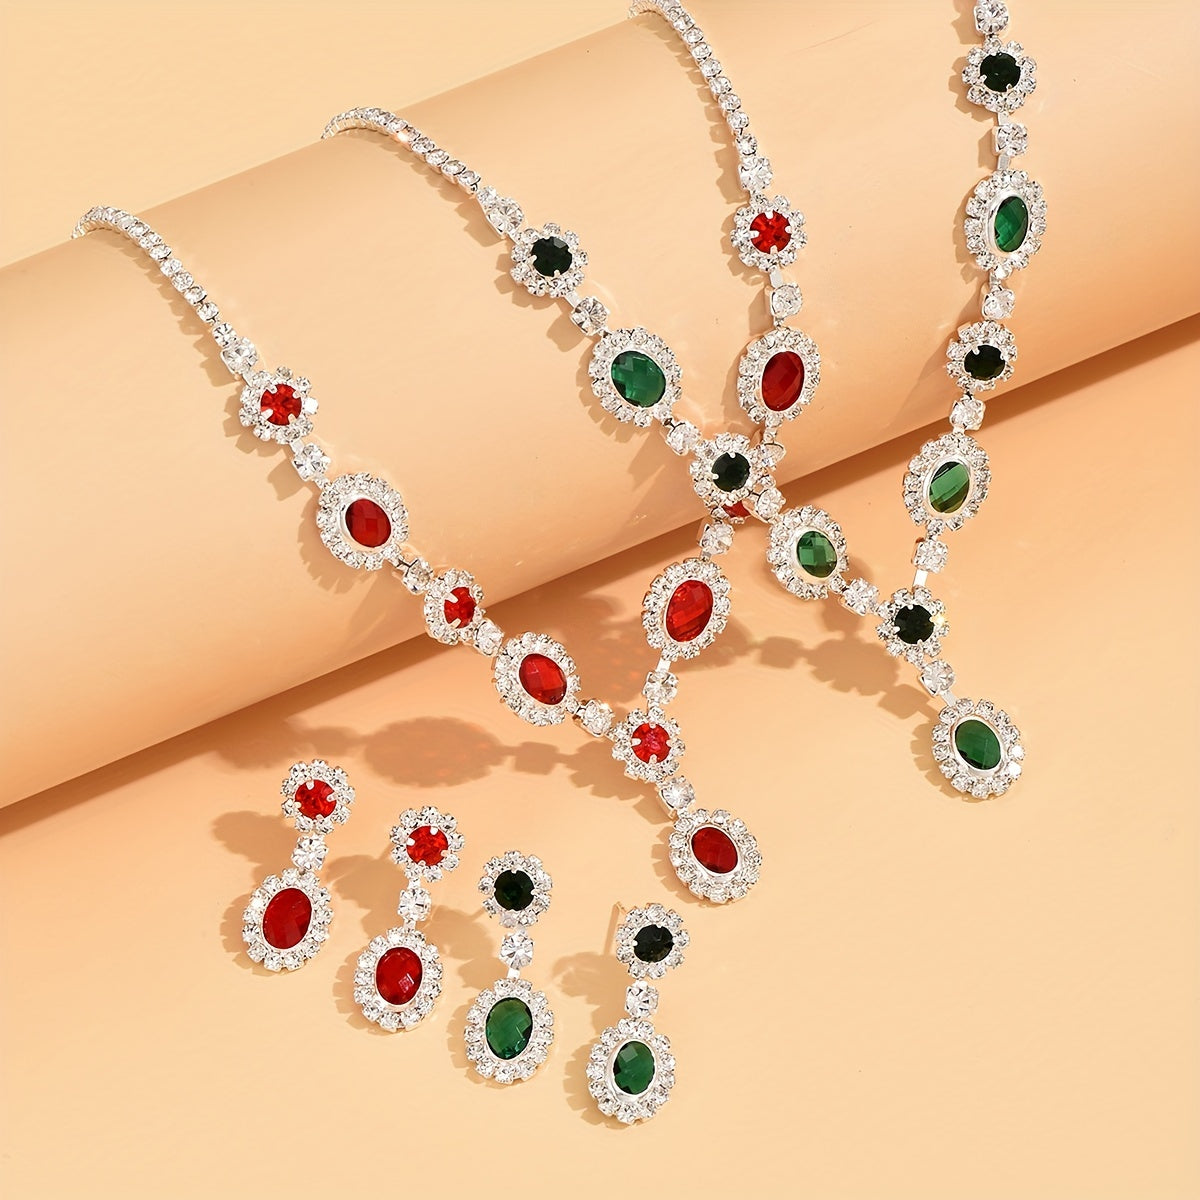 Elegant Wedding Jewelry Set with Shimmering Synthetic Gems - Perfect for Banquets and Special Occasions